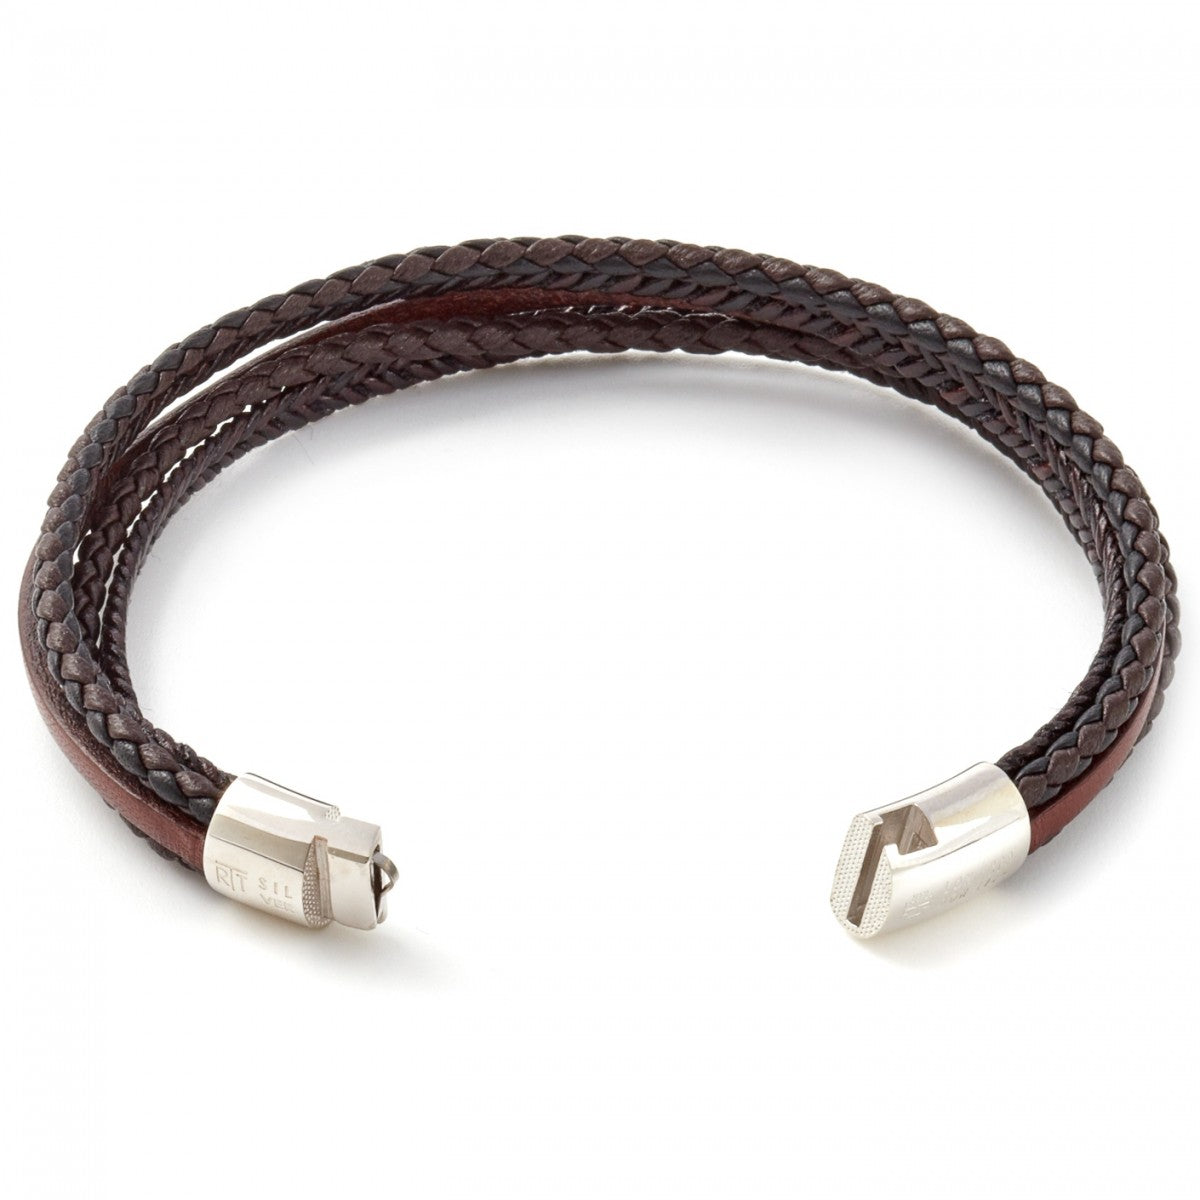 Tateossian Cobra Leather Multi Strand Wrap Bracelet with D shaped Clasp, Brown